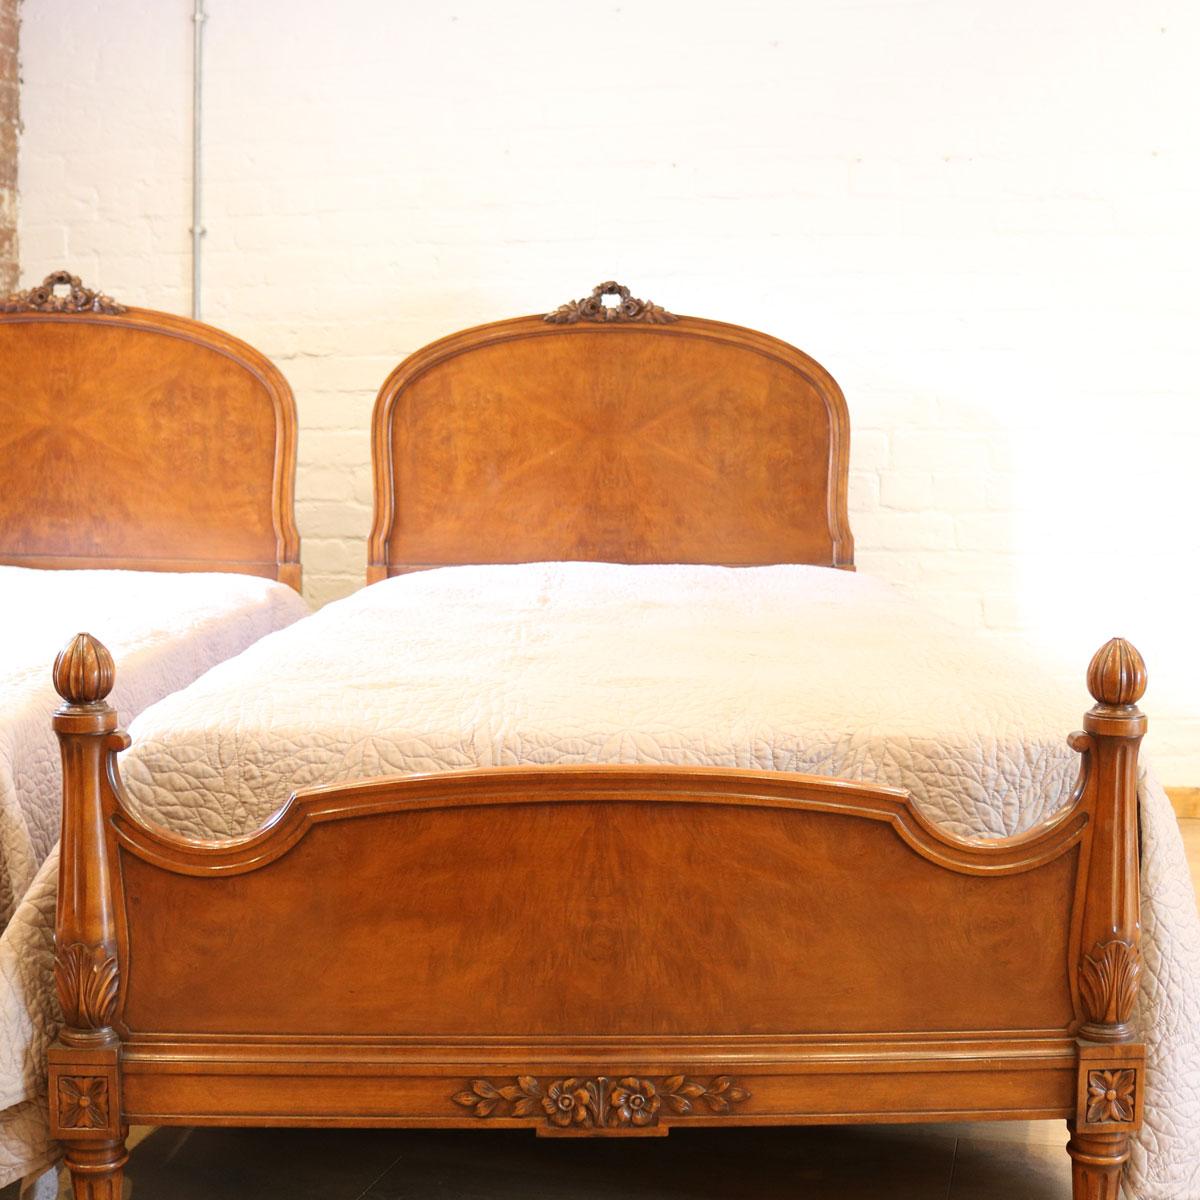 Matching pair of mid-20th century beds with elegantly arched head panels and rose garland carvings. The foot panels have attractive fluted and tapered posts.

The price is for the bed frame alone. The base, mattress, bedding and linen are extra